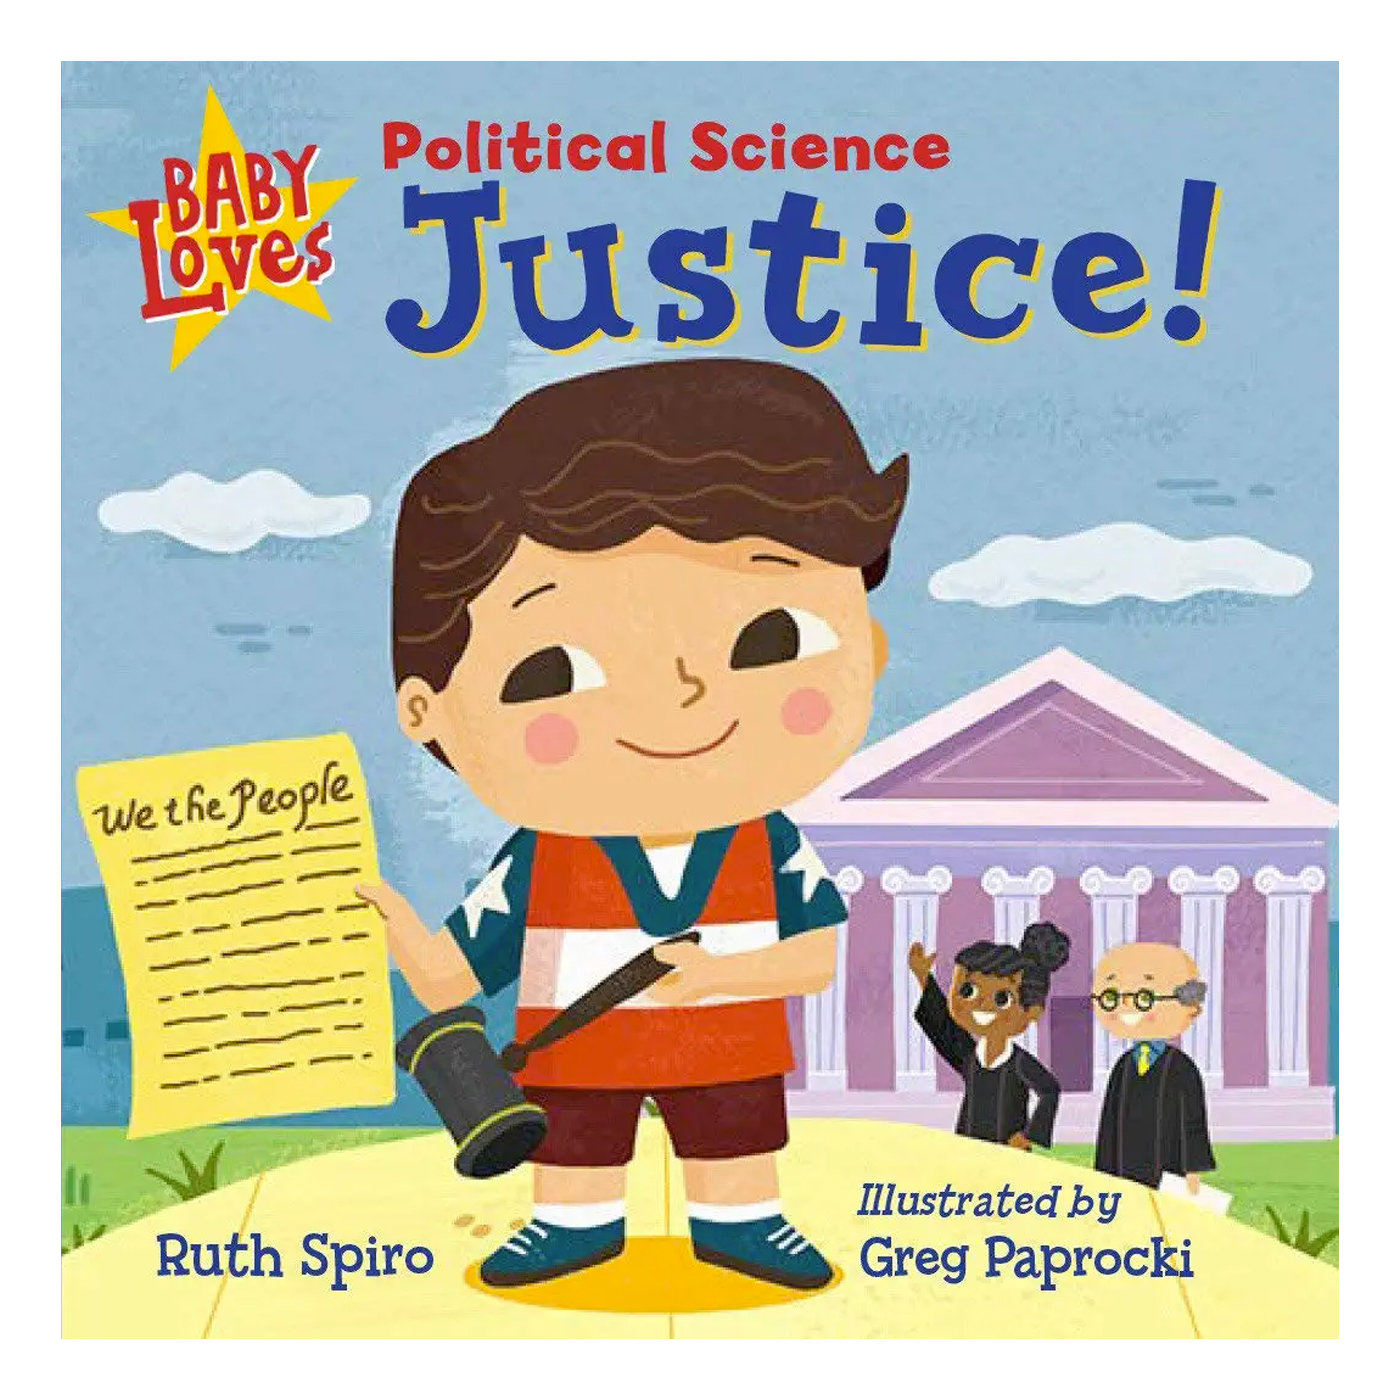  Baby Loves Political Science Justice